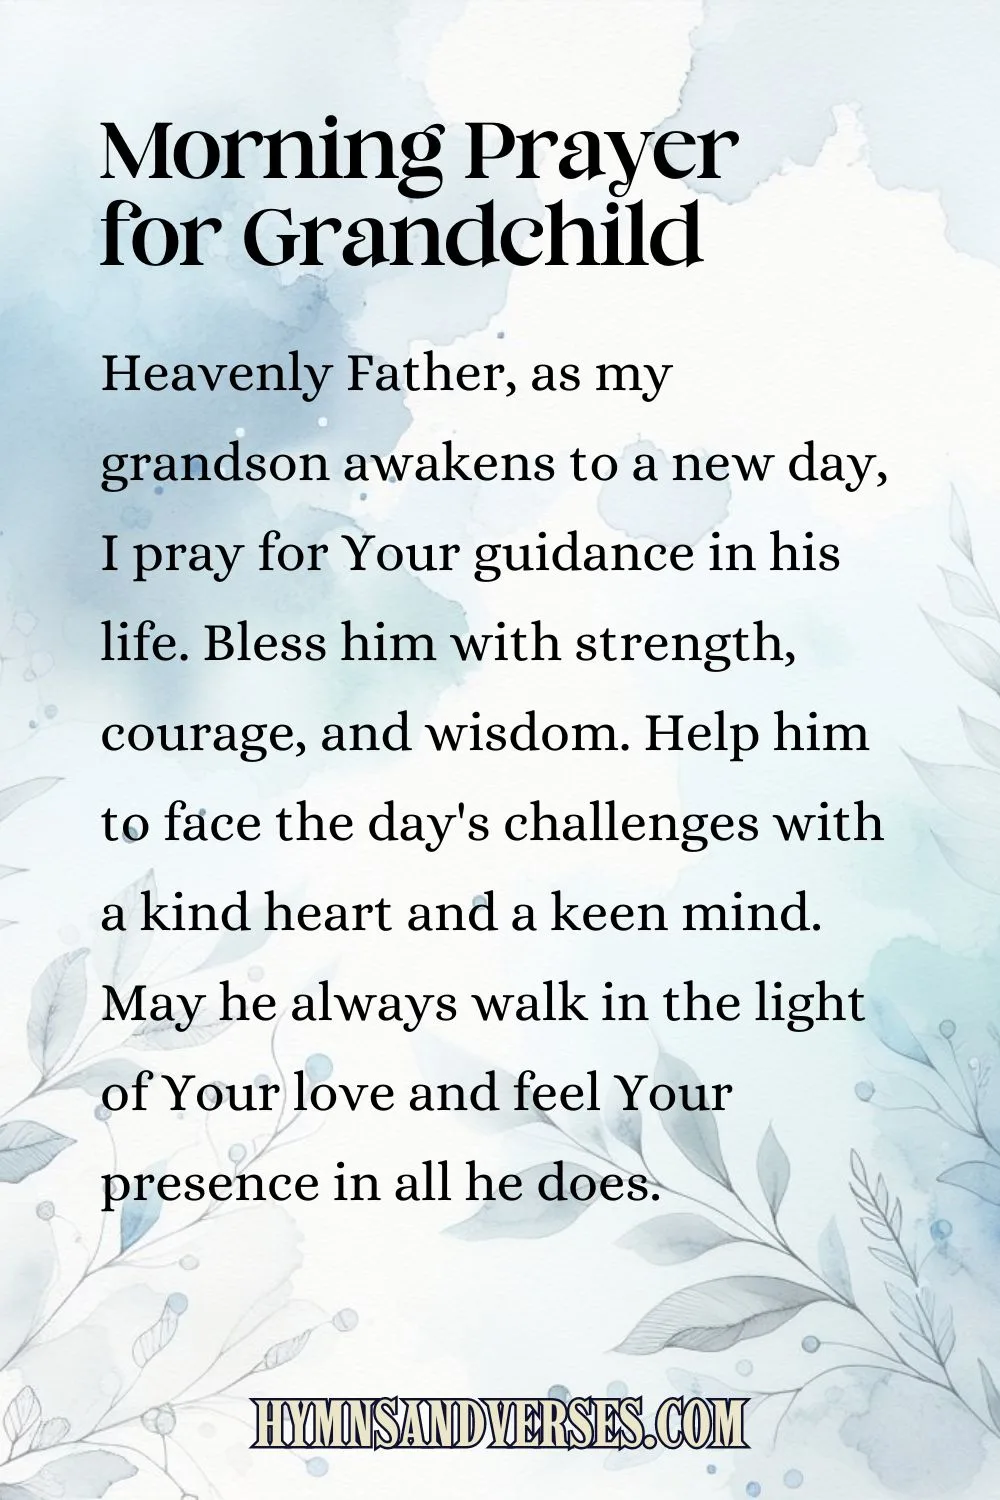 Pin sized image for a morning prayer for a grandchild, reads: Heavenly Father, as my grandson awakens to a new day, I pray for Your guidance in his life. Bless him with strength, courage, and wisdom. Help him to face the day's challenges with a kind heart and a keen mind. May he always walk in the light of Your love and feel Your presence in all he does.